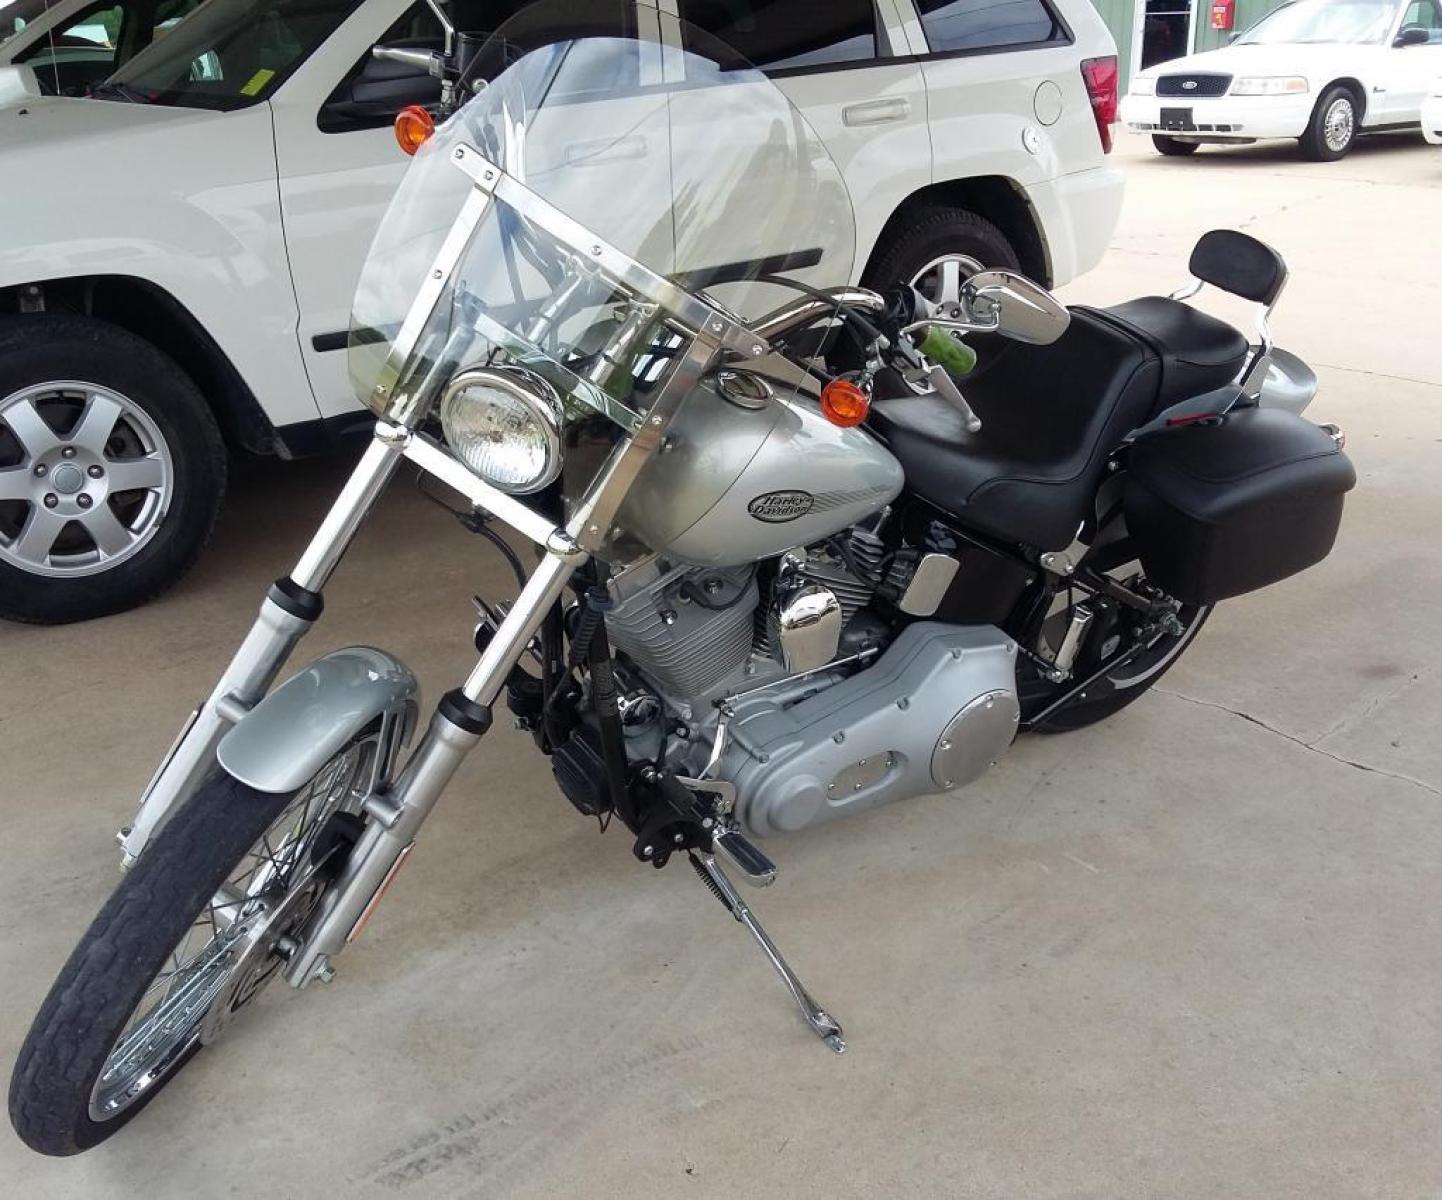 2004 Silver Harley-Davidson FXSTI - (1HD1BVB164Y) with an 1450CC engine, Standard transmission, located at 17760 HWY 62, MORRIS, 74445, 35.609104, -95.877060 - 2004 HARLEY-DAVIDSON FXSTI SOFTAIL STANDARD 1450CC FEATURES HARLEY SADDLEBAGS, AN ACCESSORY BAG ON THE TANK, SILVER POWDER-COATED ENGINE AND COVERS, HARDTAIL STYLING WITH HIDDEN HORIZONTAL REAR SHOCKS, BLACK HORSESHOE OIL TANK, BOBTAIL FENDER, RAKED FRONT FORKS. ALWAYS GARAGE KEPT!! IT'S IN EXCELLE - Photo #9